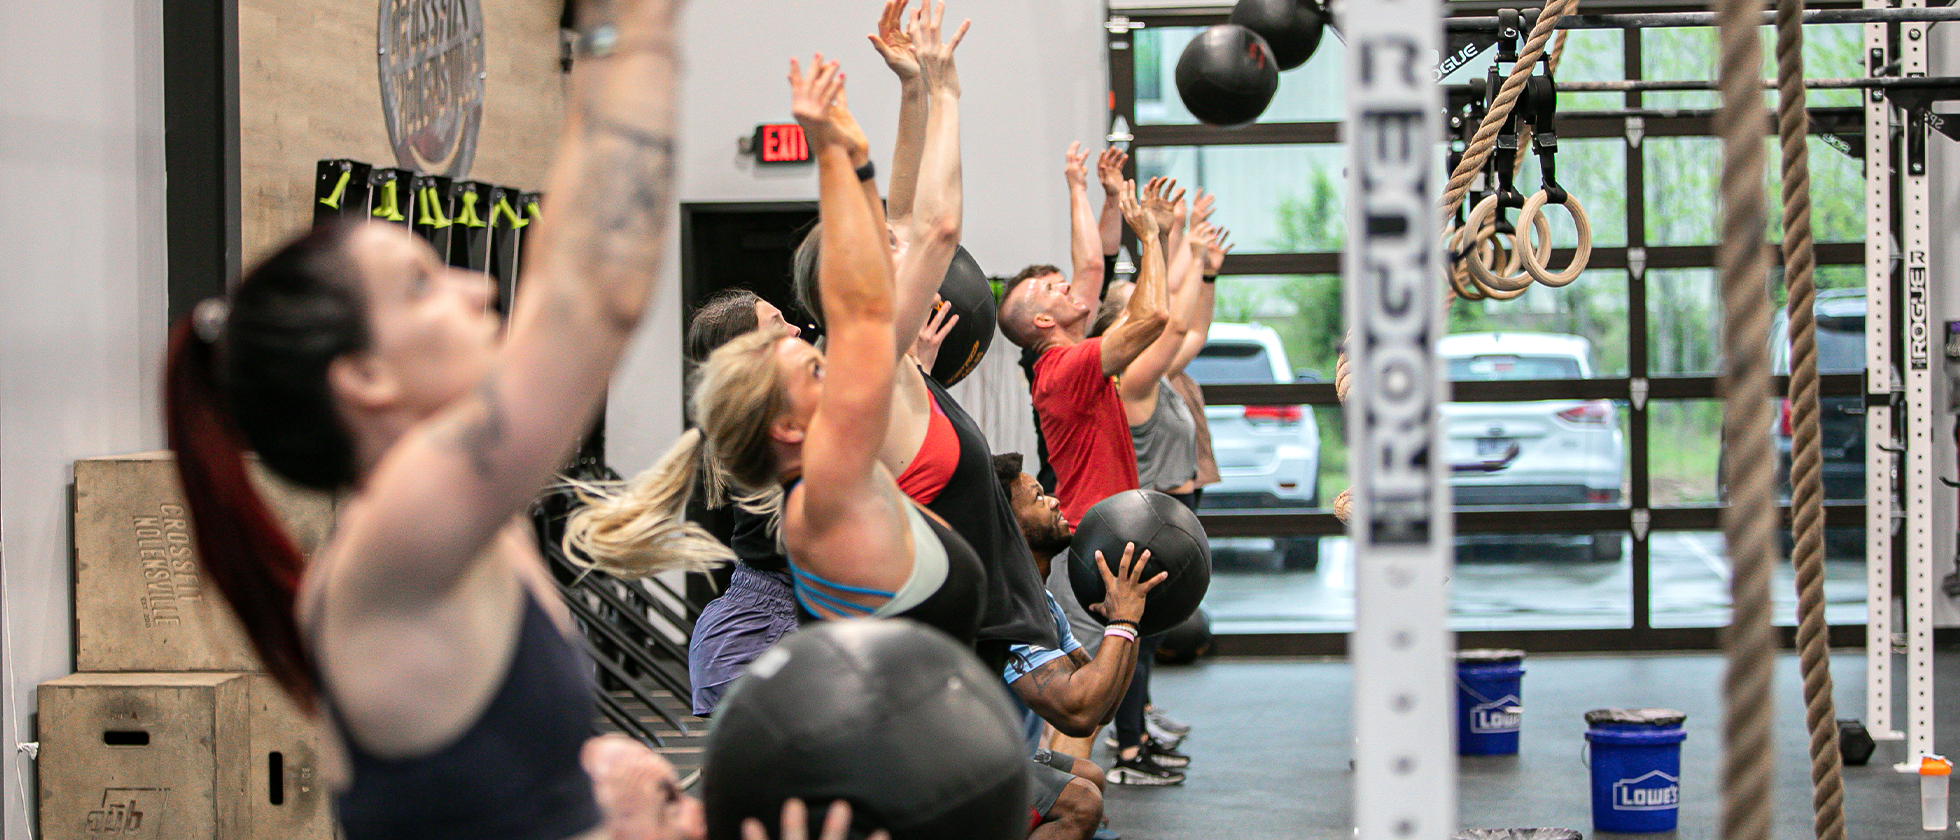 Top 5 Best CrossFit Gyms To Join Near Nolensville